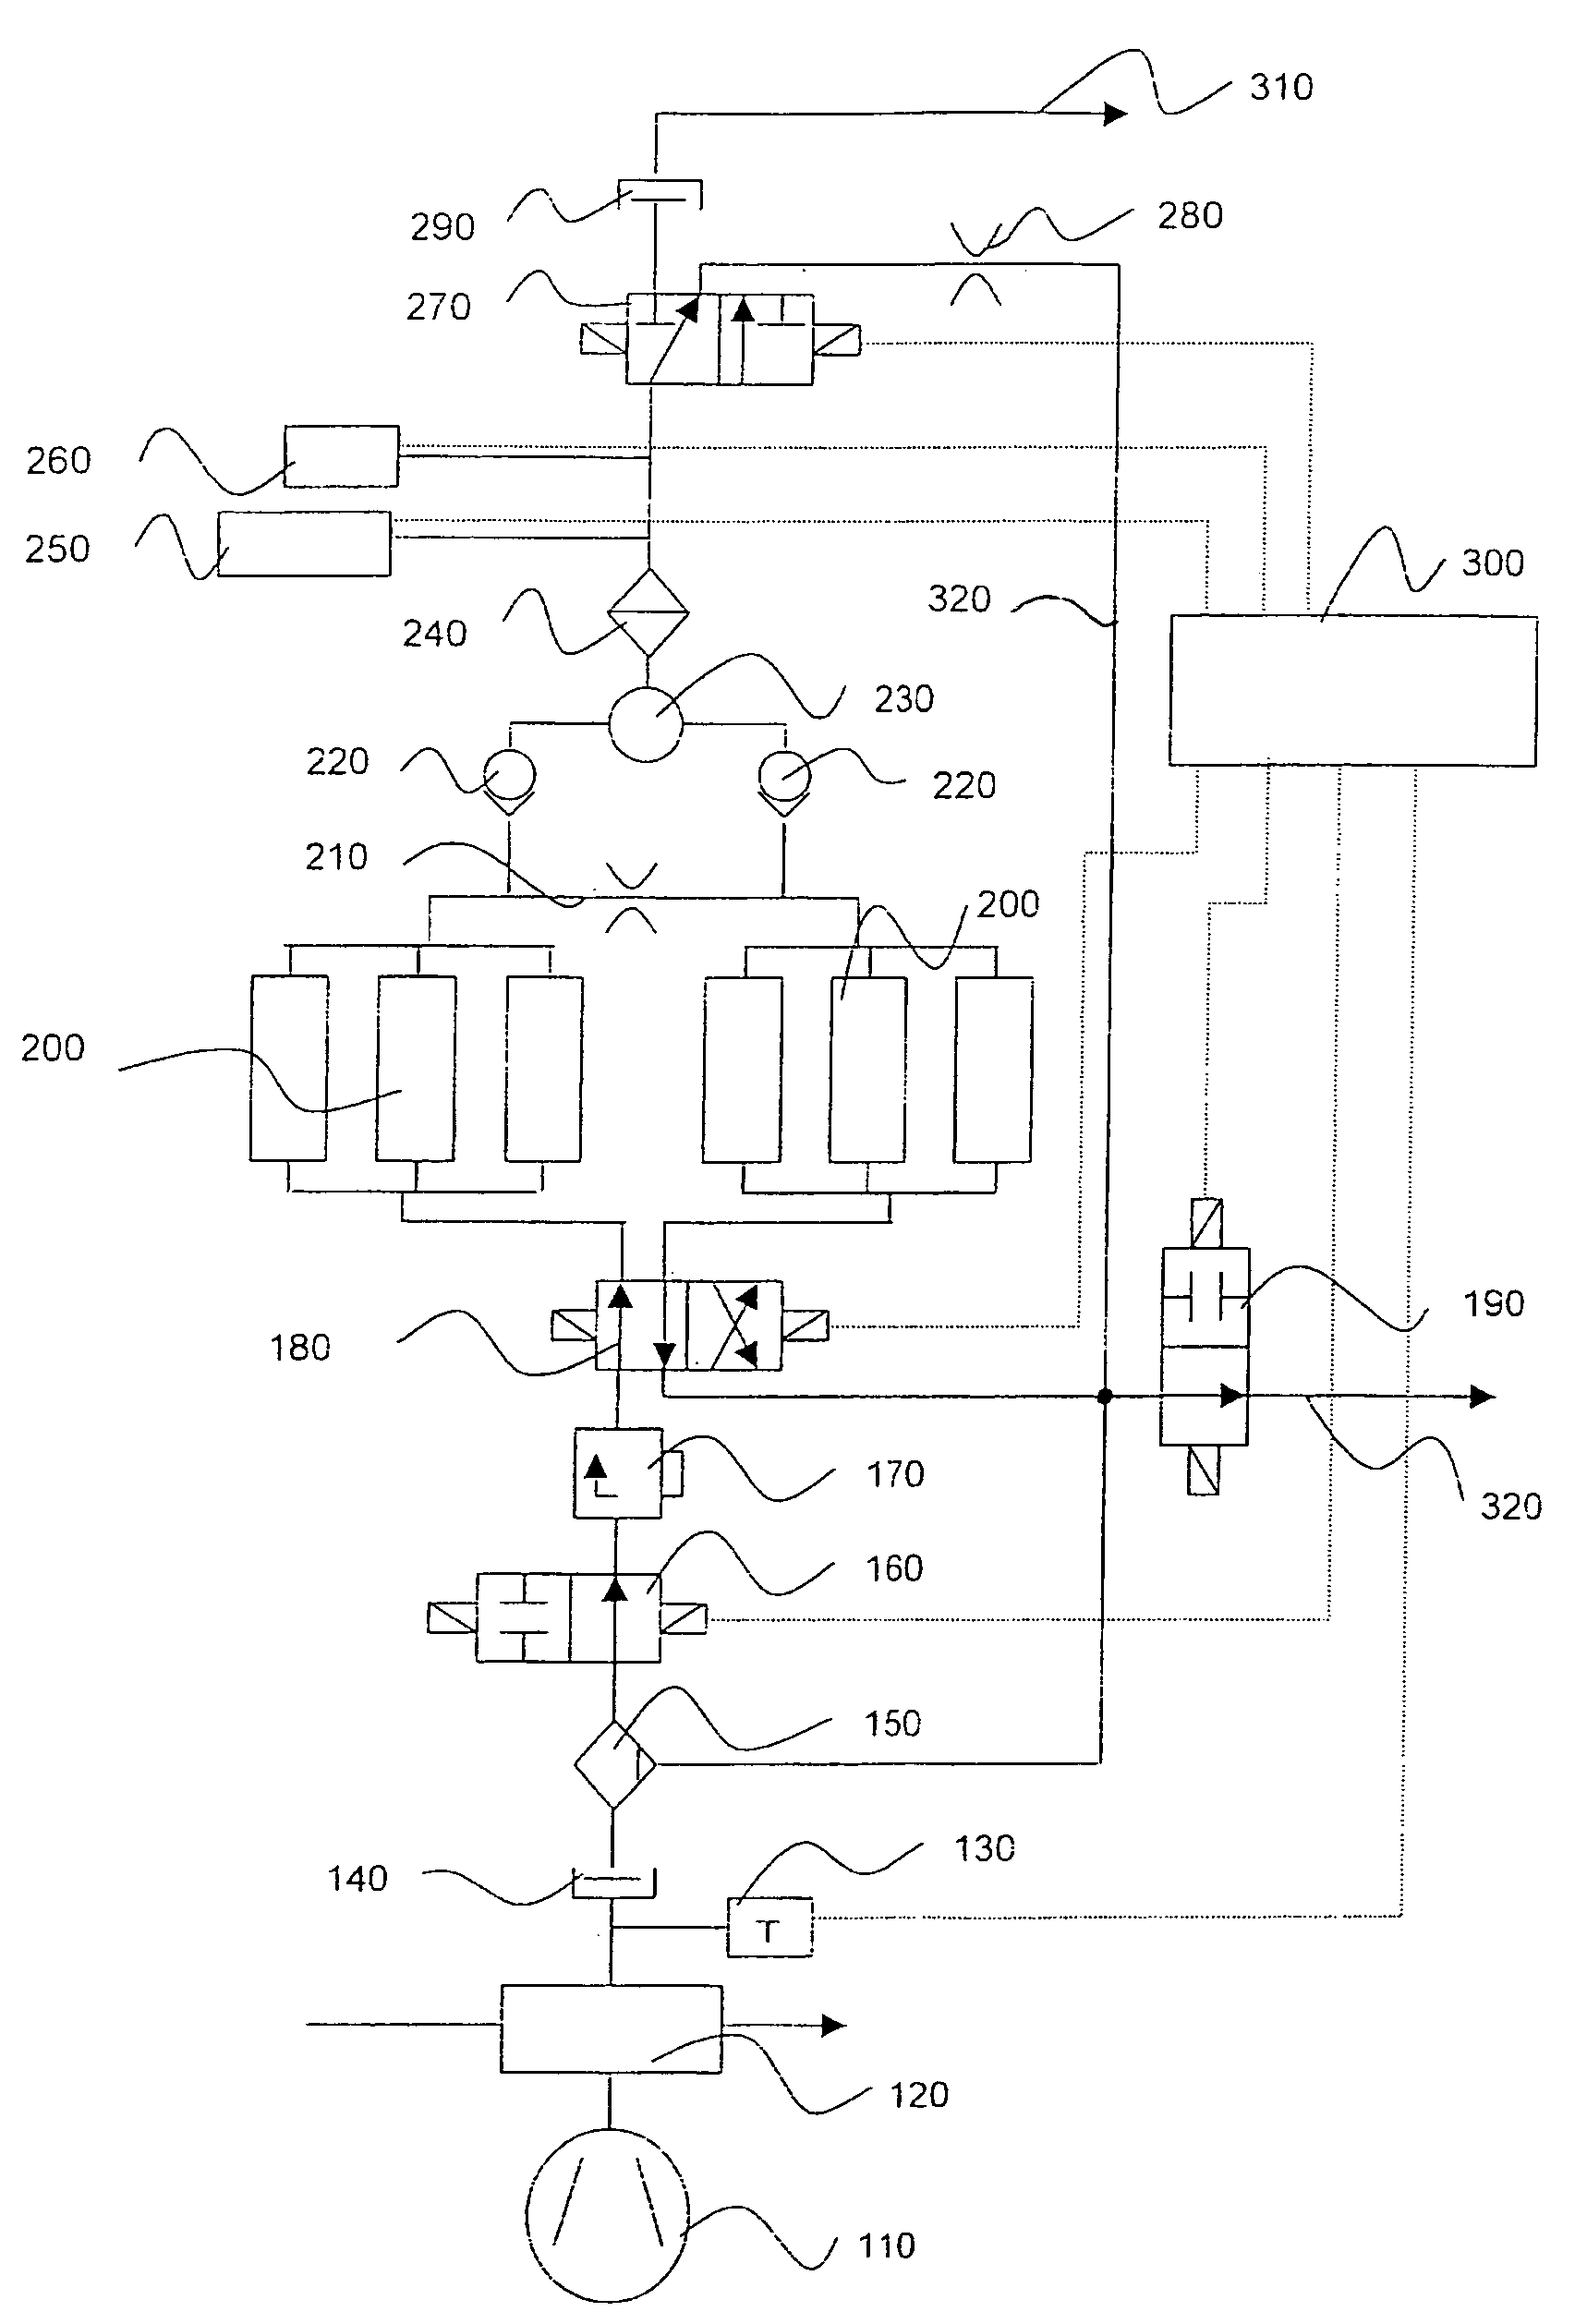 Device for enriching air with oxygen in an aircraft, and a method for operating the device